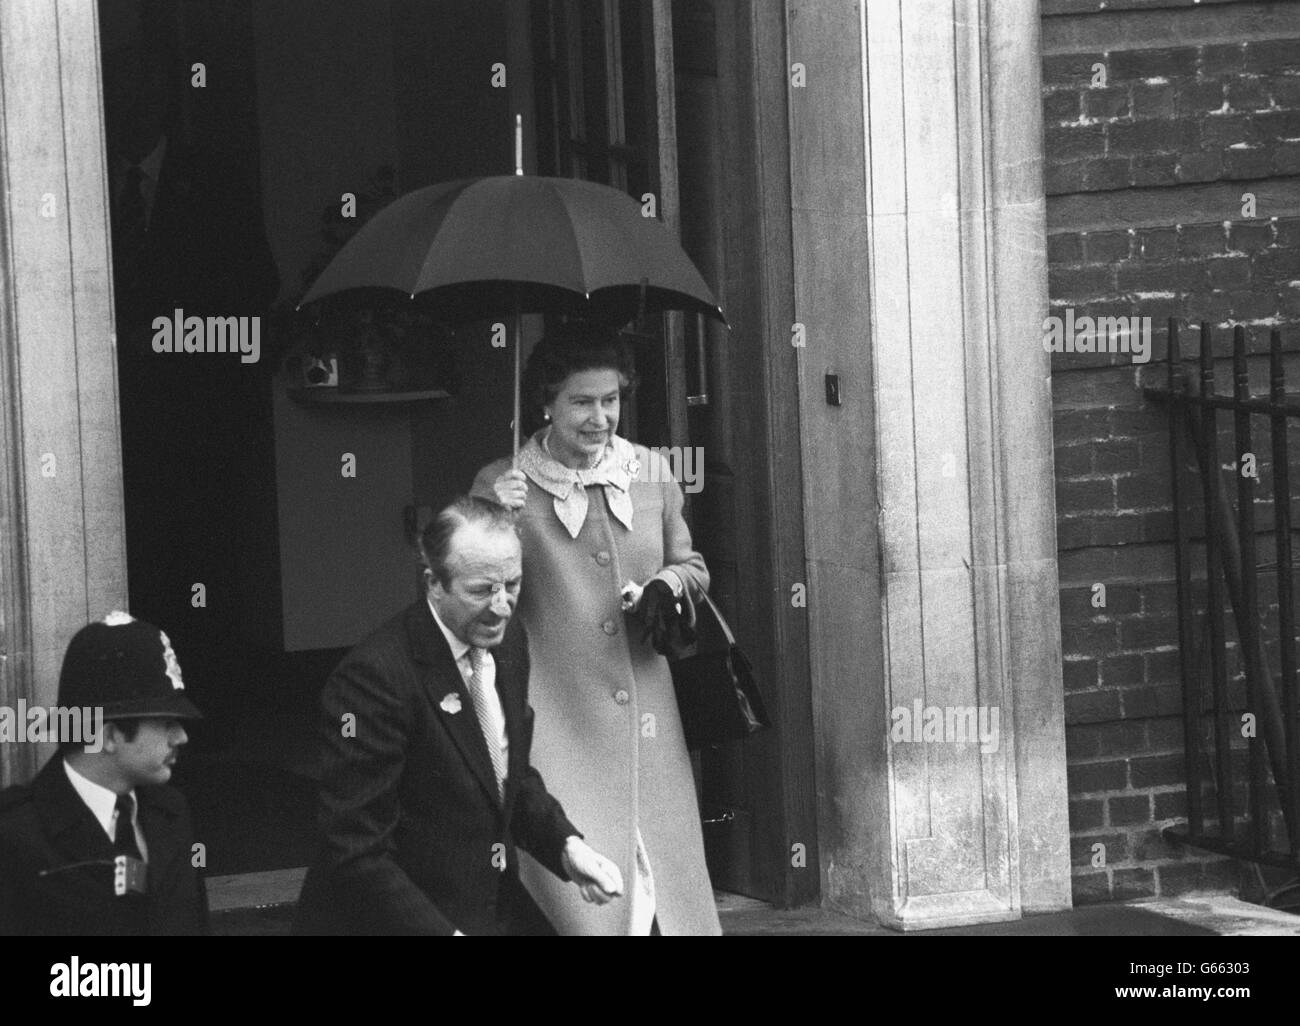 The Queen arriving at St Mary's Hospital, Paddington, London, for a 20-minute visit to see her daughter-in-law, the Princess of Wales and her firstborn child, a son who was born just after 9pm last night. Prince Charles was already at the hospital to greet his Royal mother. Stock Photo